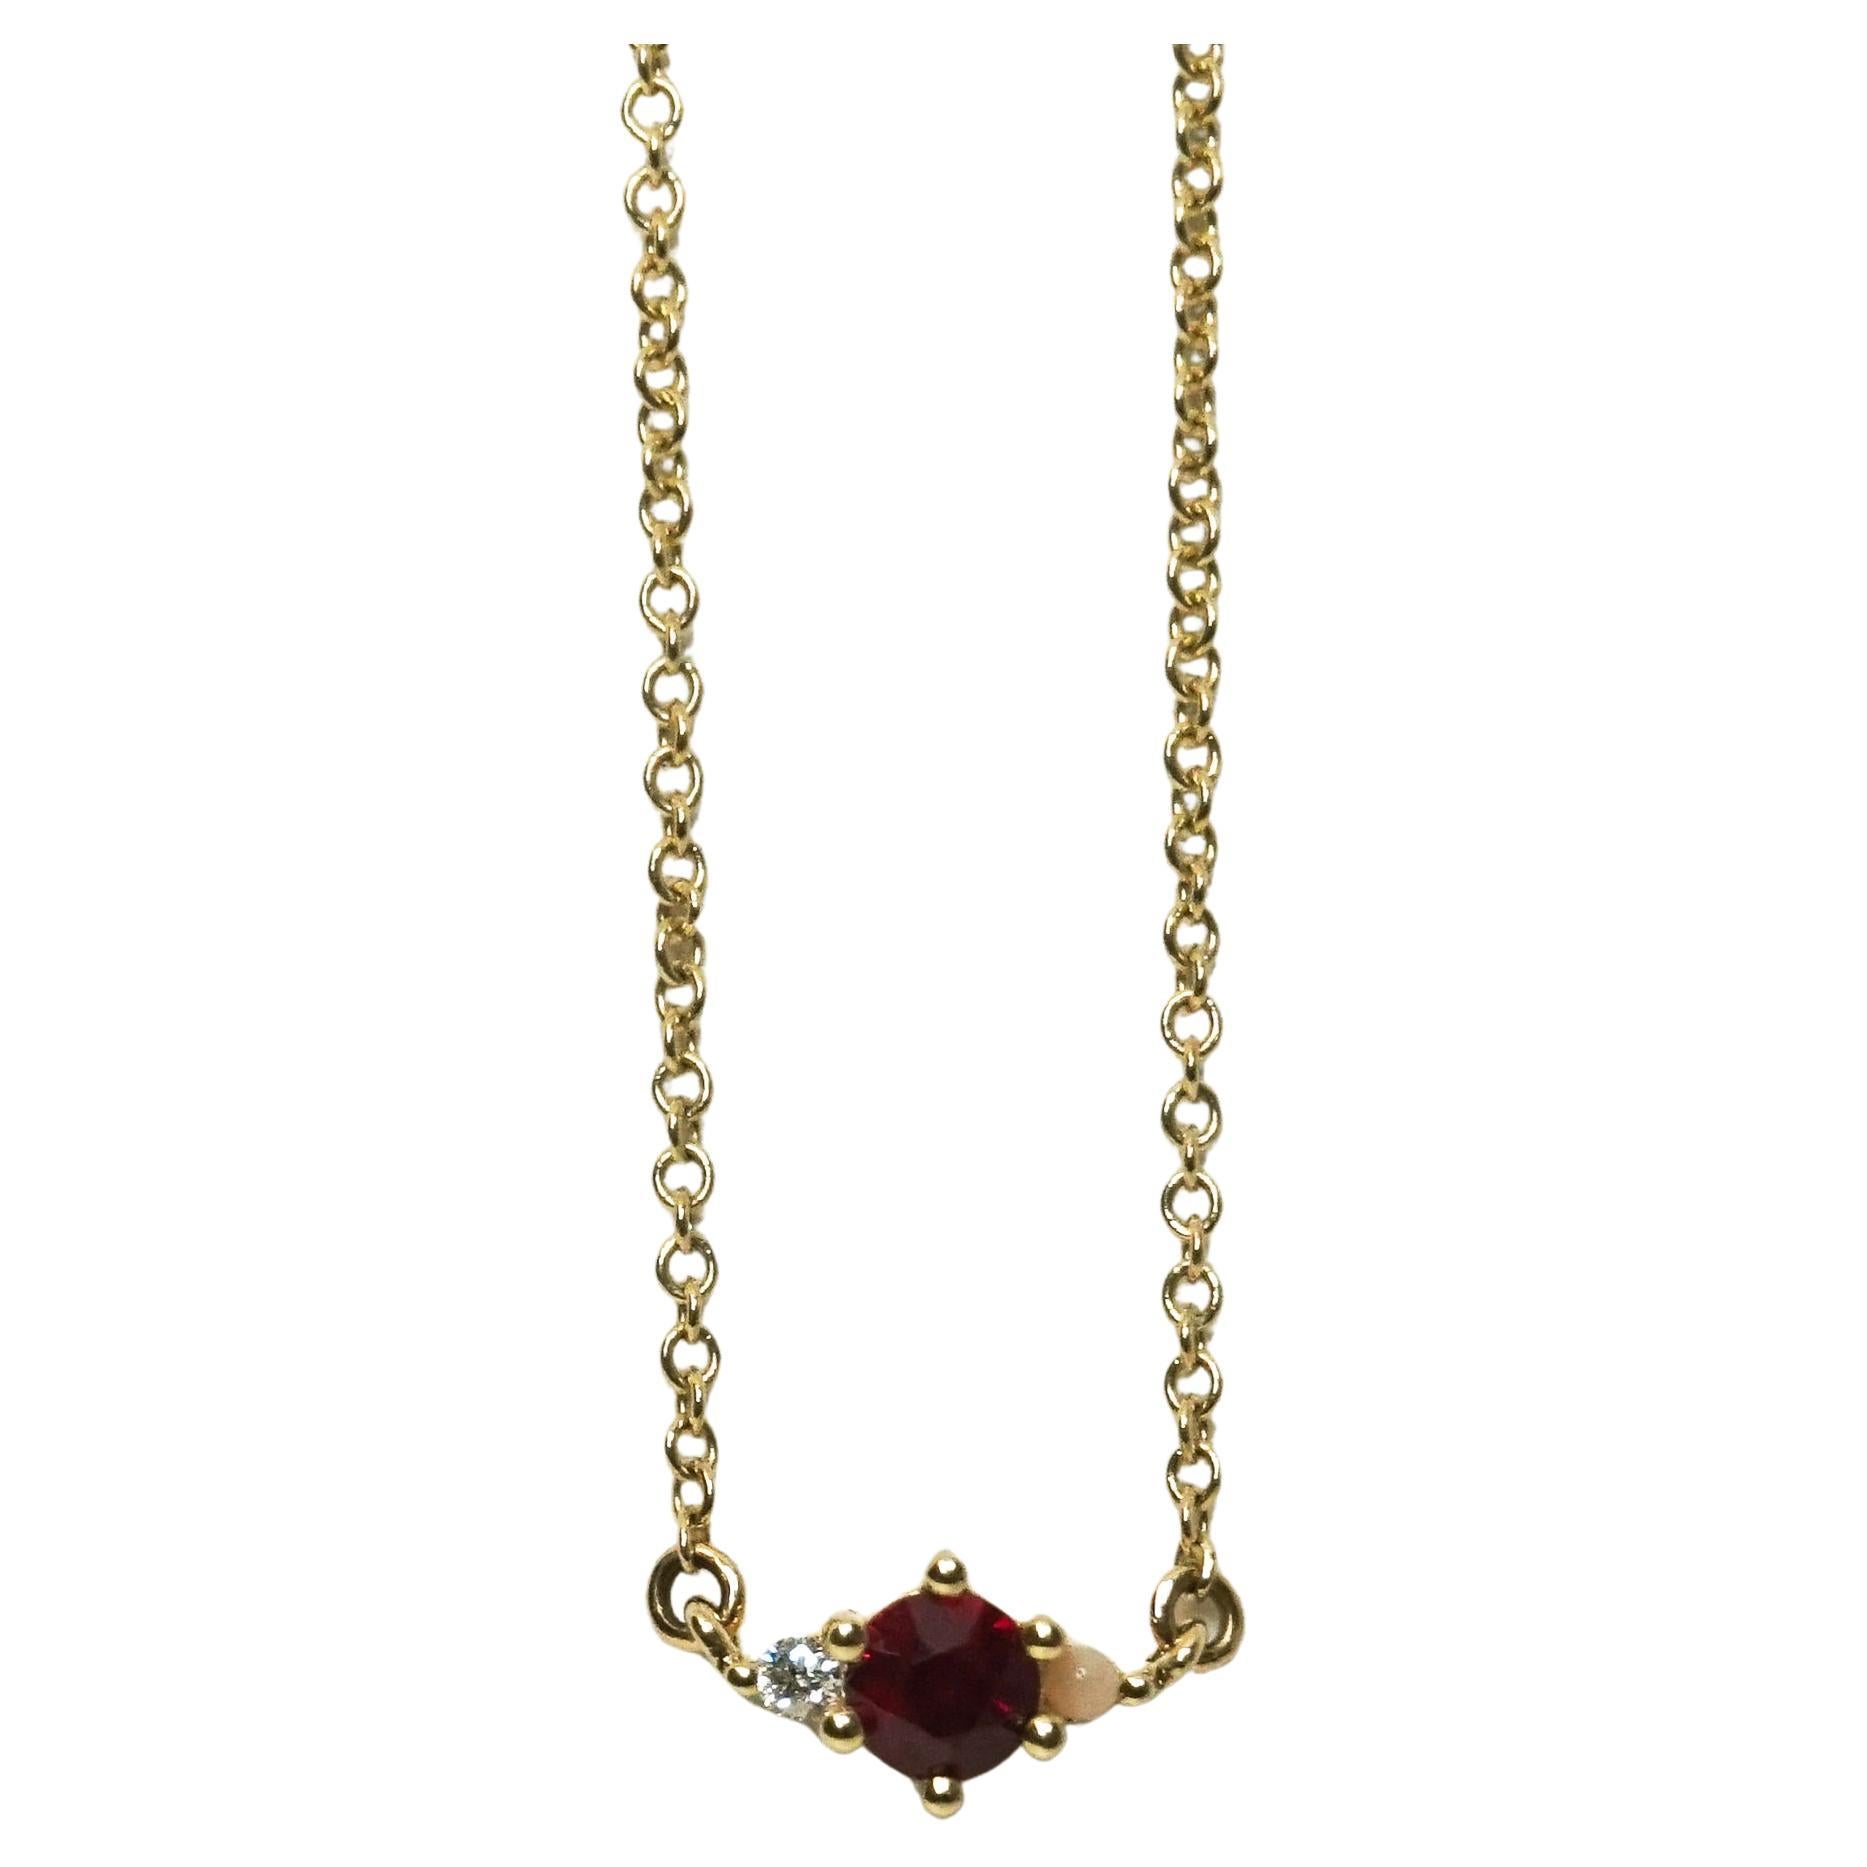 Adina Reyter One of a Kind Diamond + Ruby + Pink Opal Trio Necklace For Sale